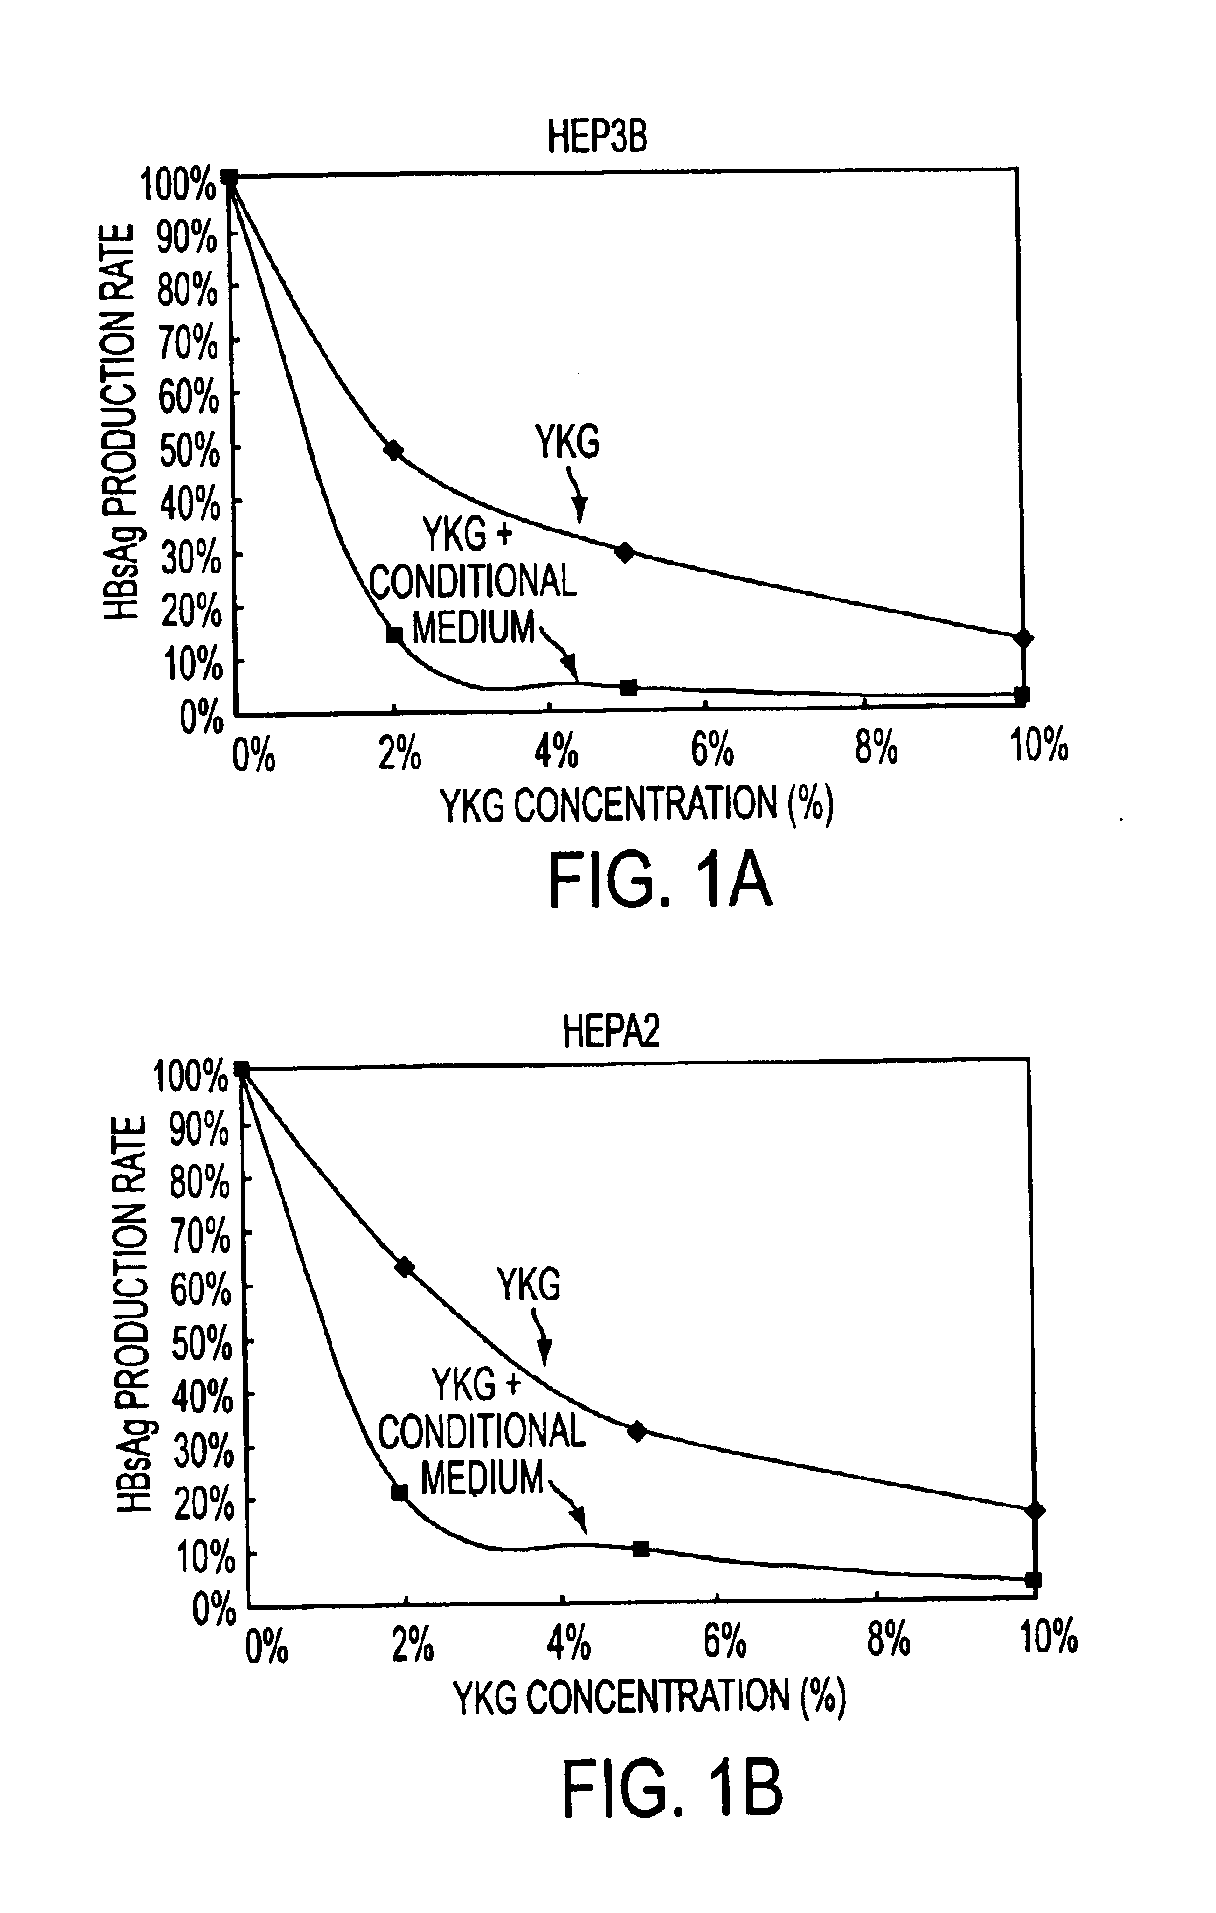 Pharmaceutical composition having prophylactic effects on lamivudine-related disease relapse and drug resistance and methods of using the same